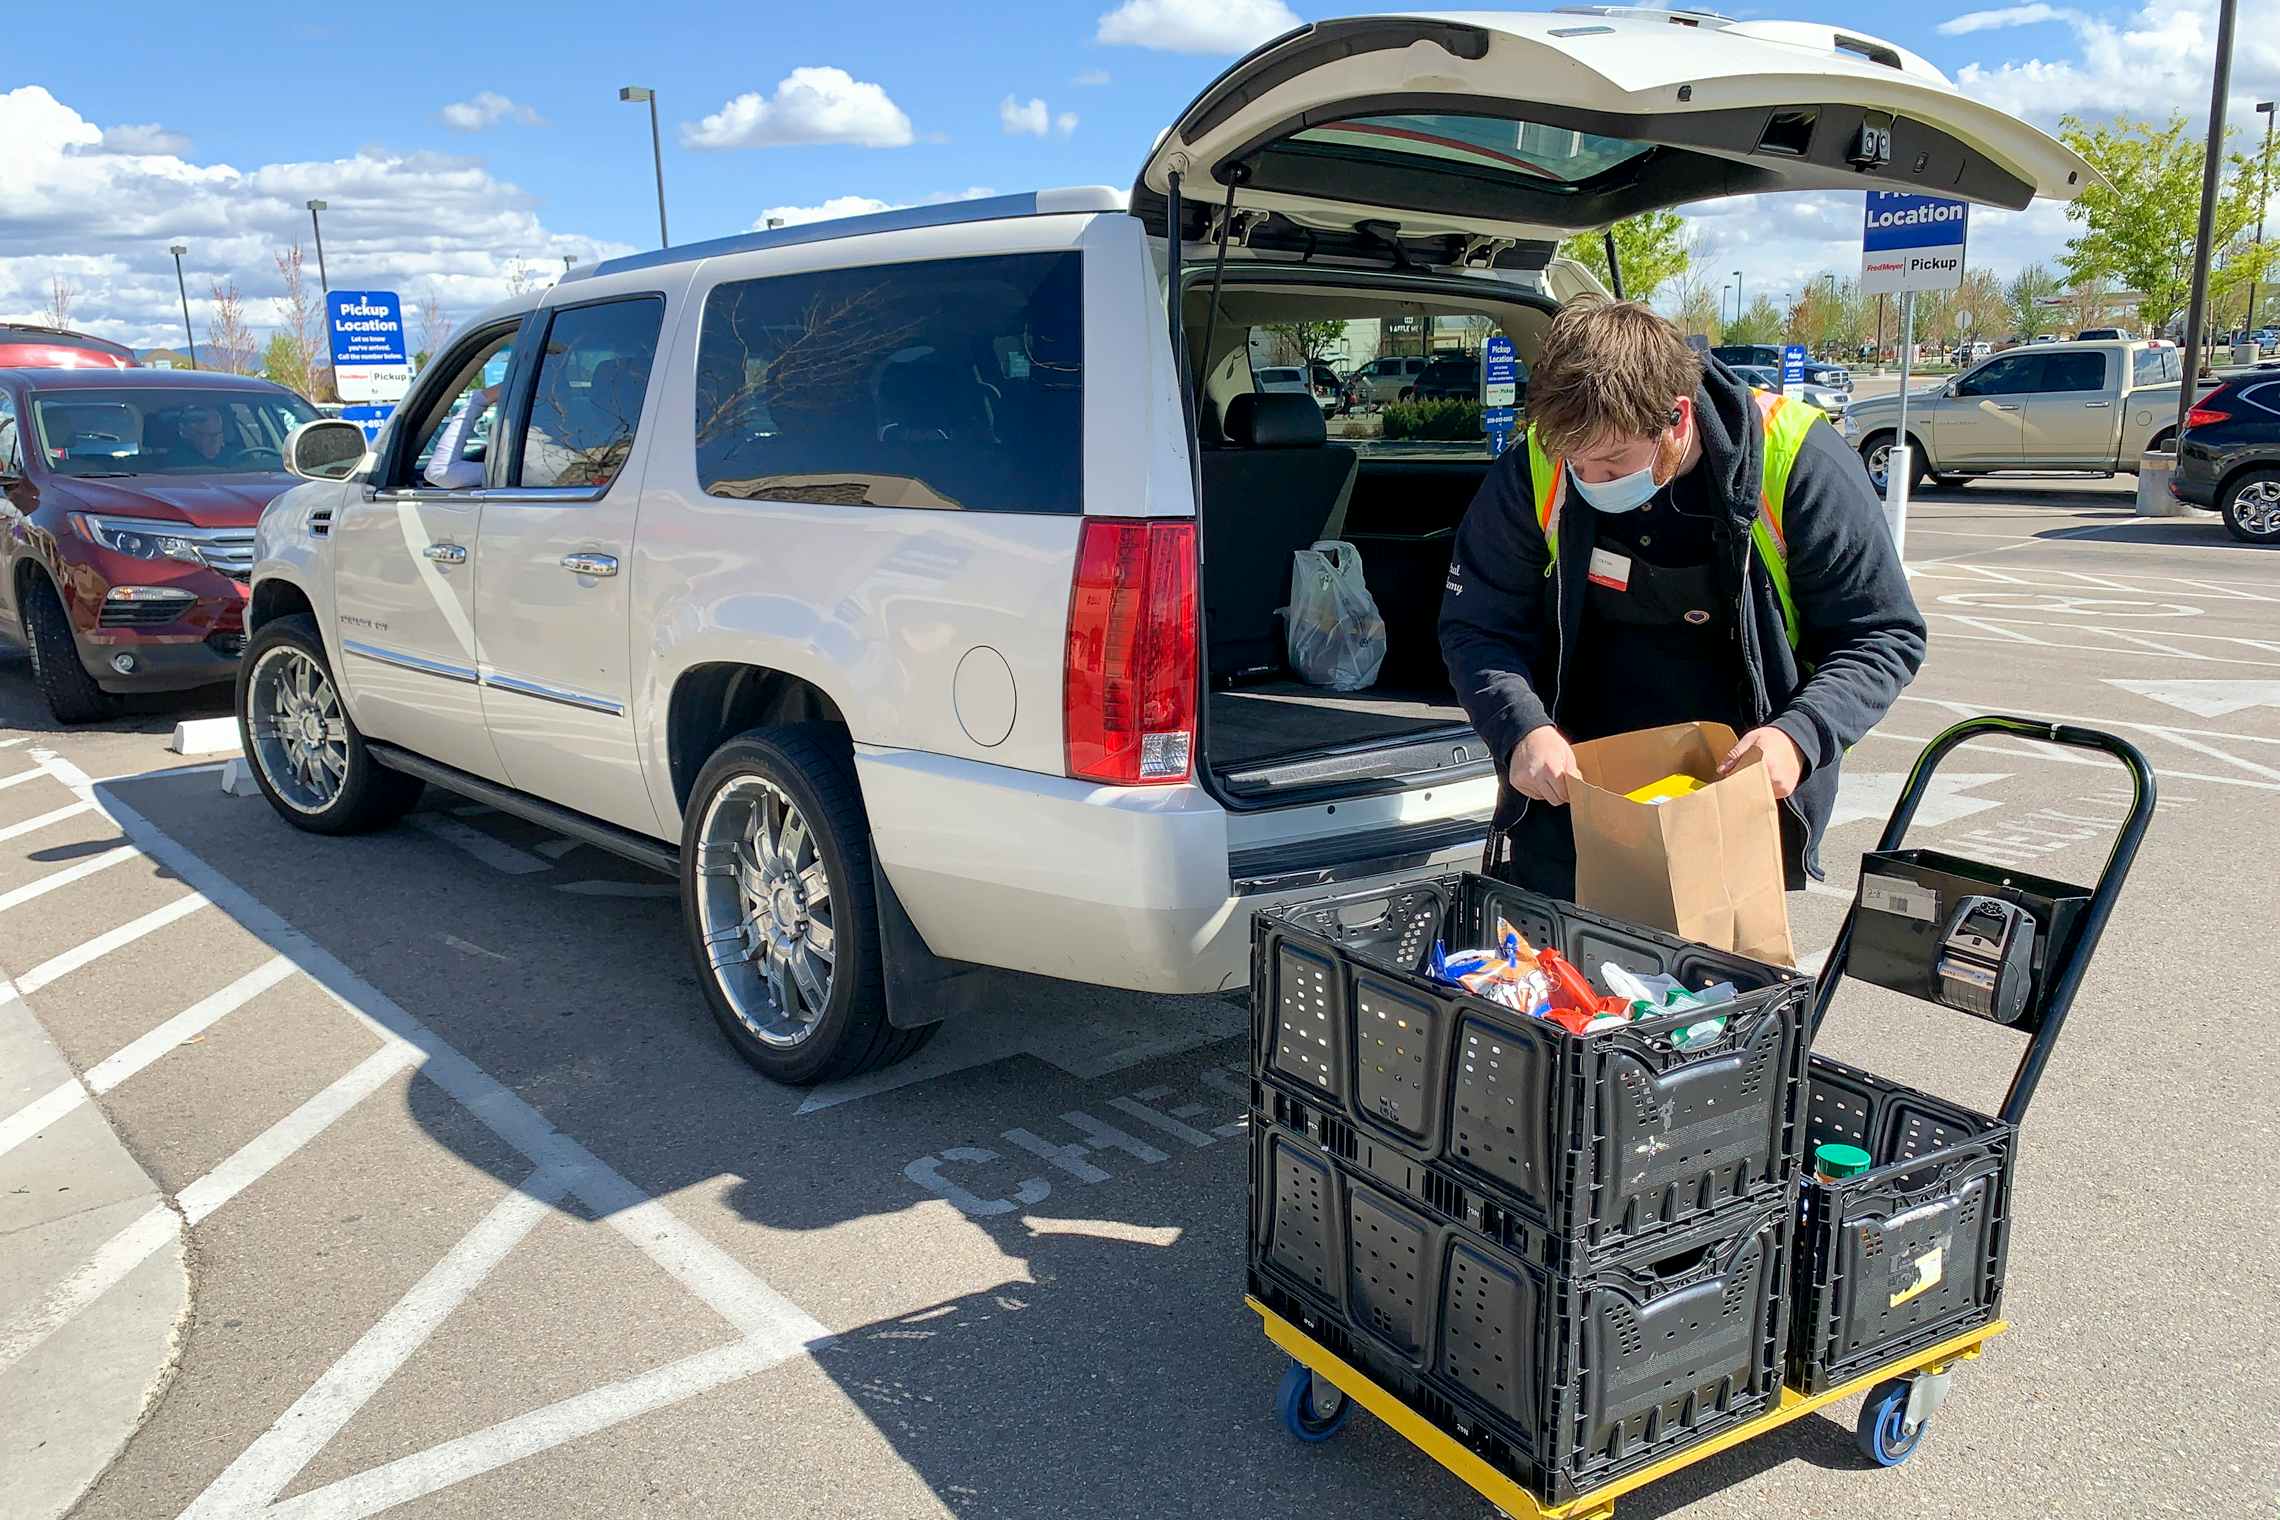 A Fred Meyer employee putting grocery items into the back of a vehicle.